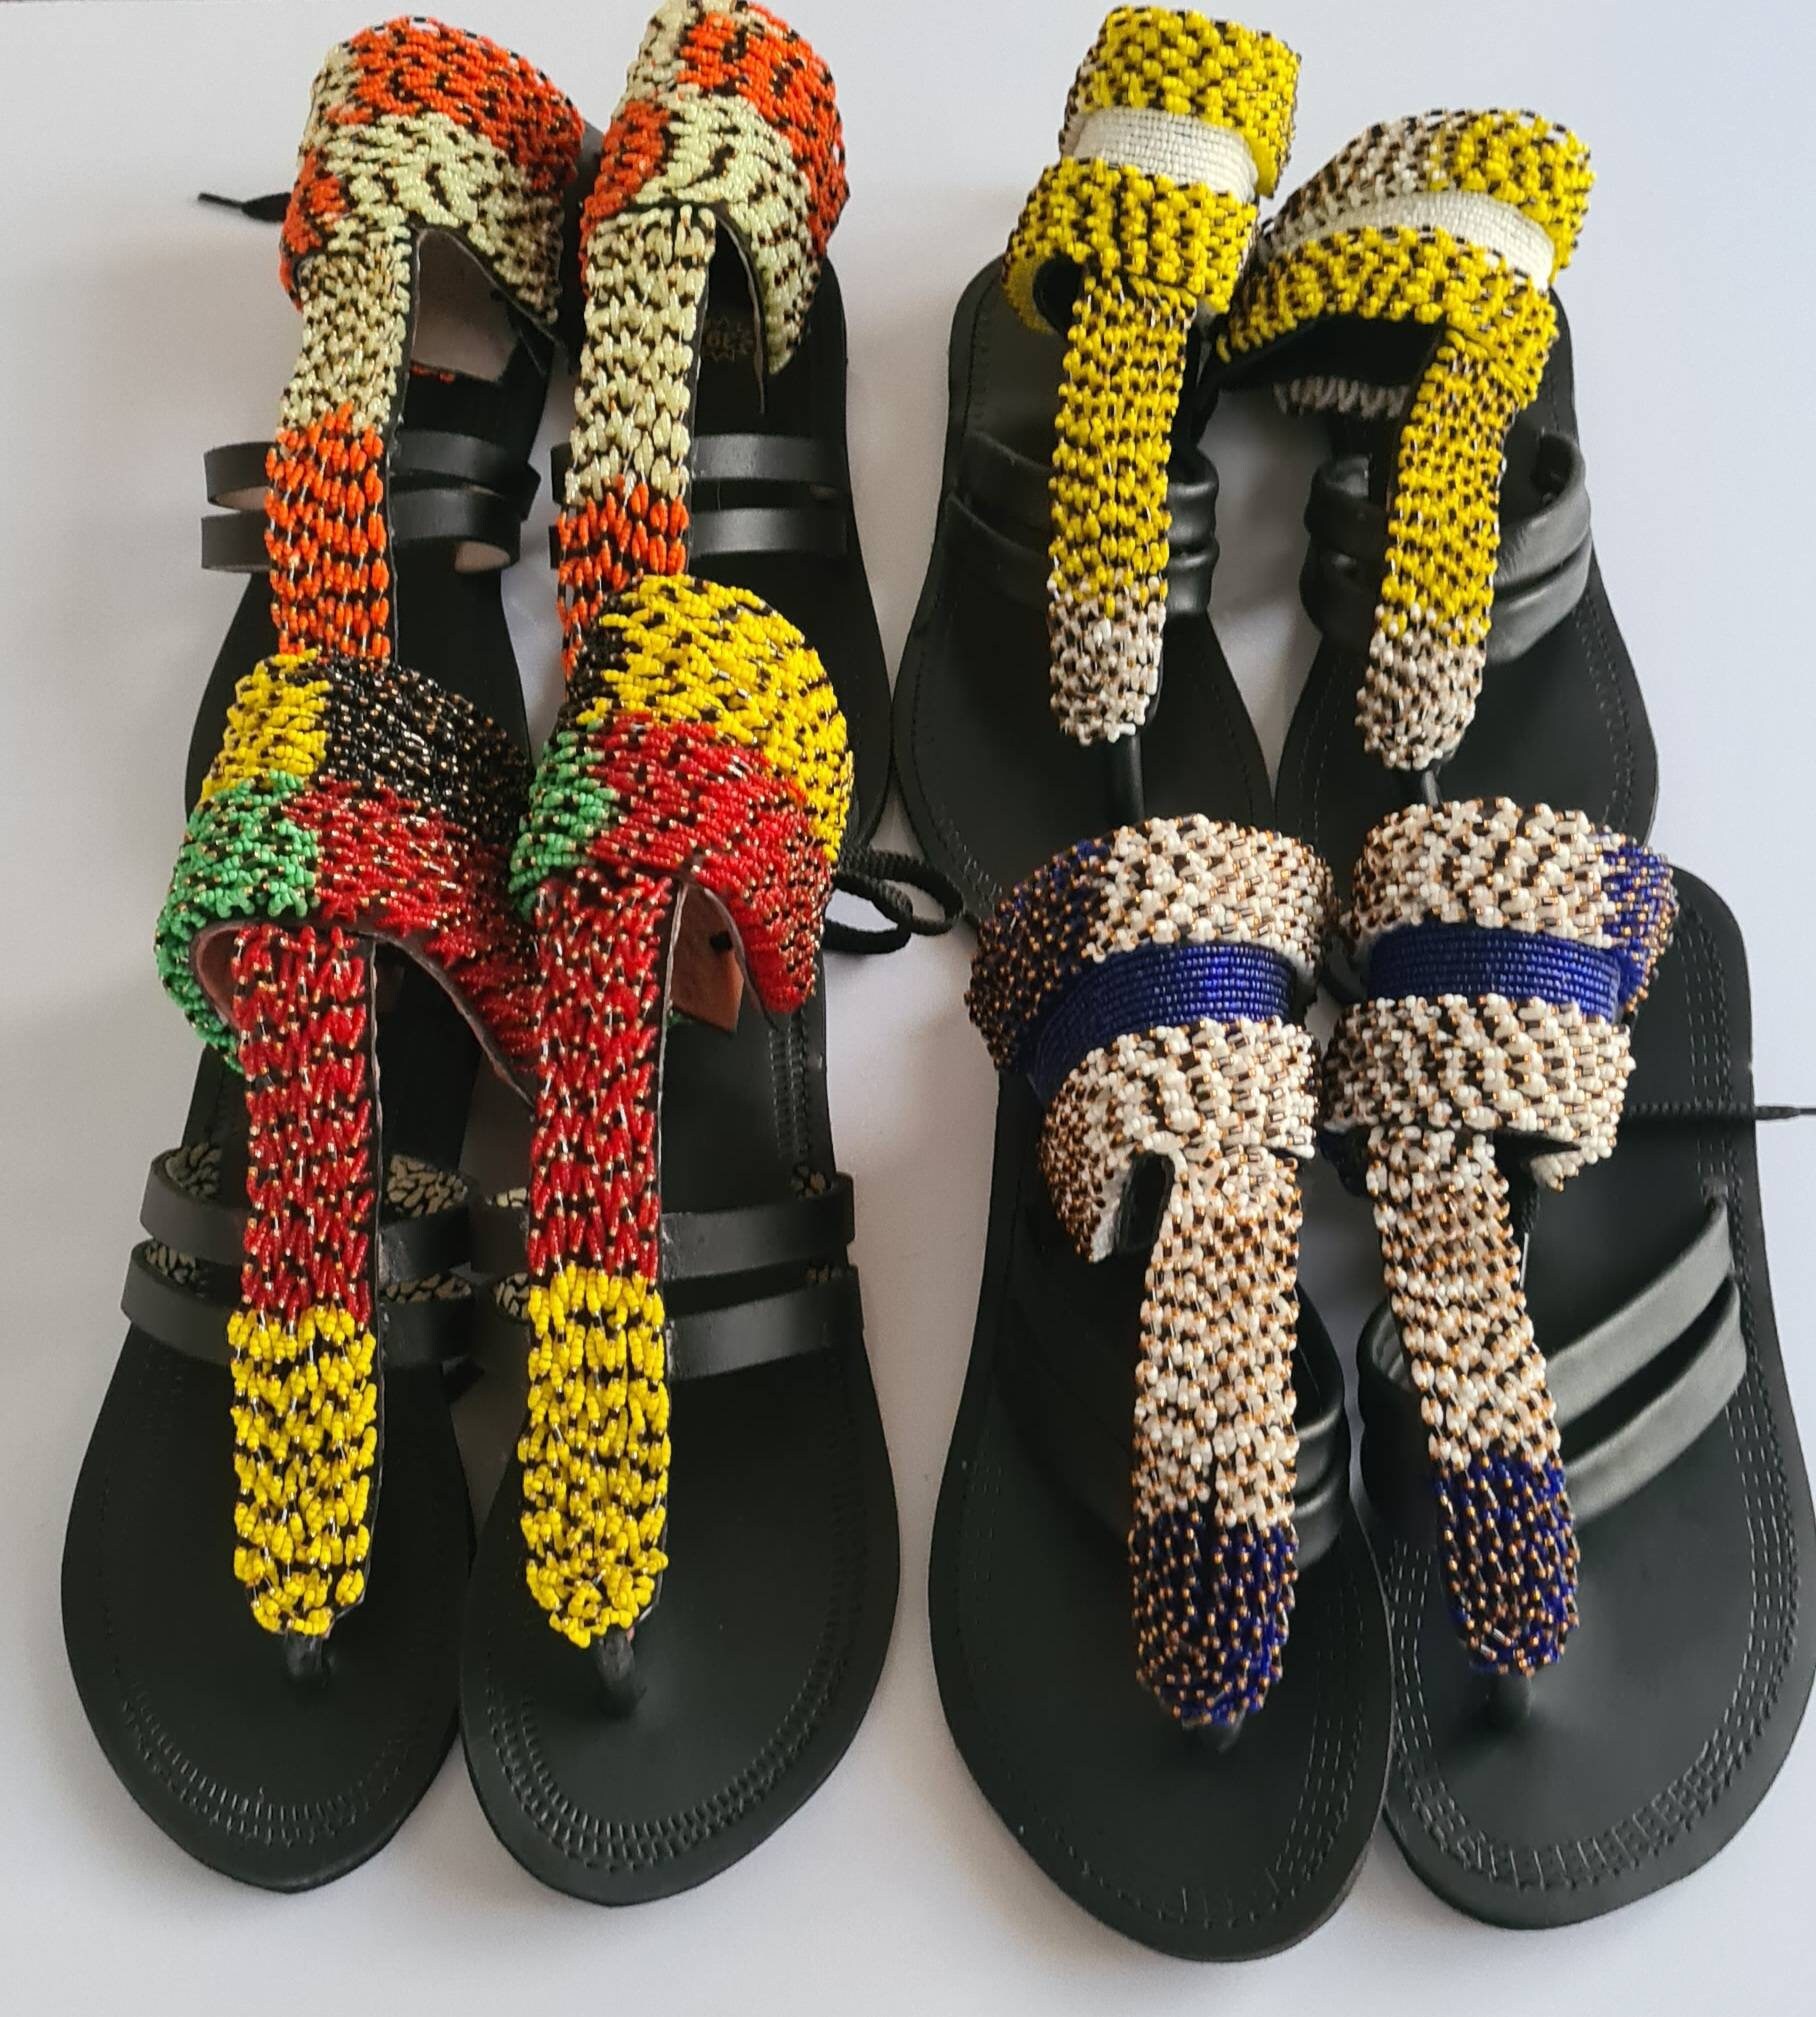 wholesale maasai sandals Shoes Womens Shoes Sandals Gladiator & Strappy Sandals African sandals bulk leather beaded sandals. One toe maasai sandals 